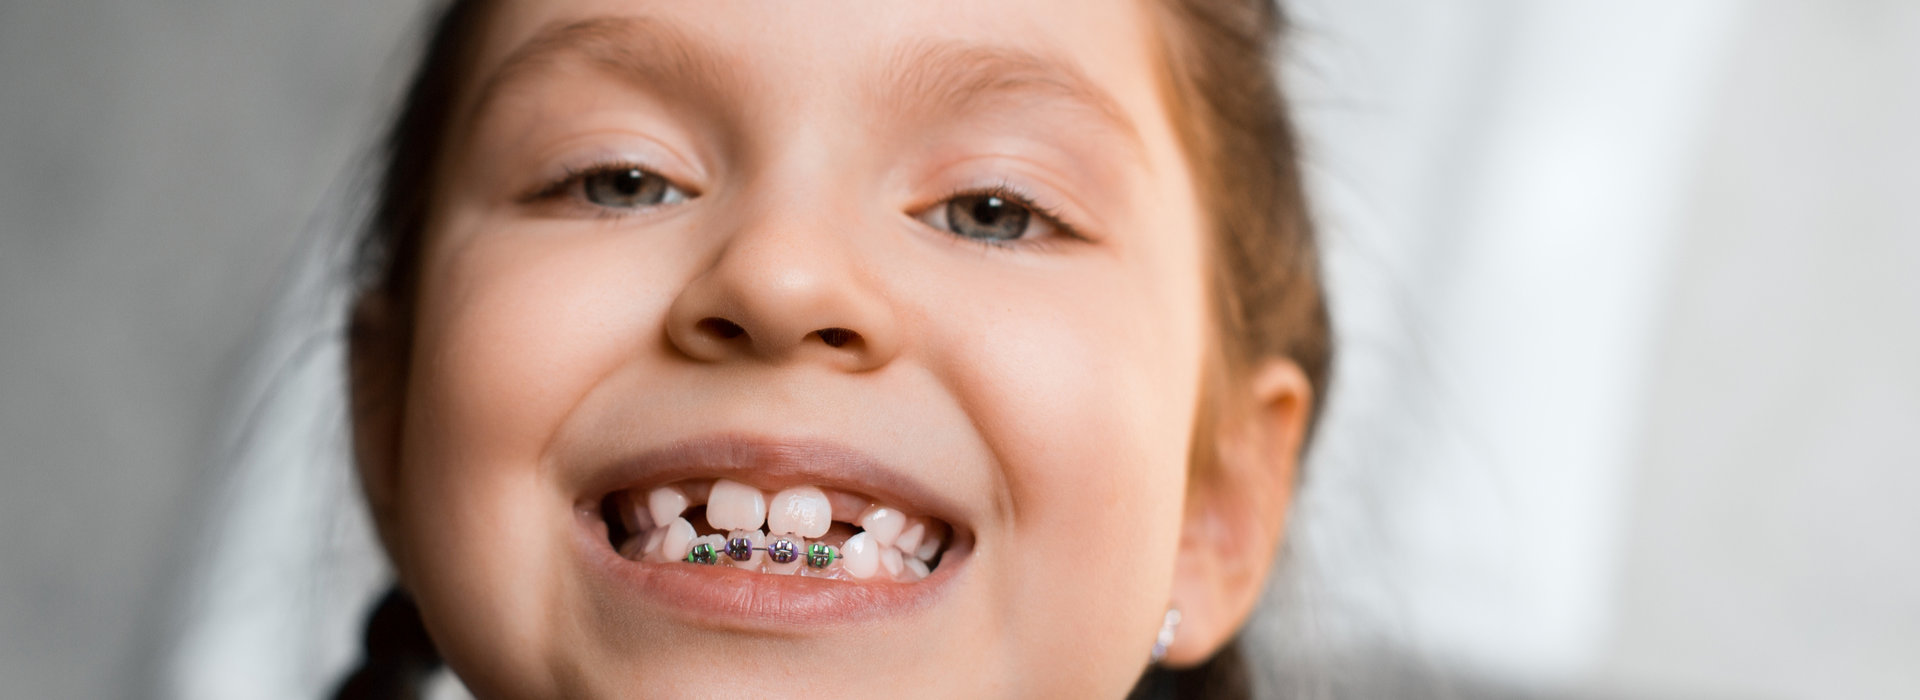 A child is smiling after early orthodontic treatment.